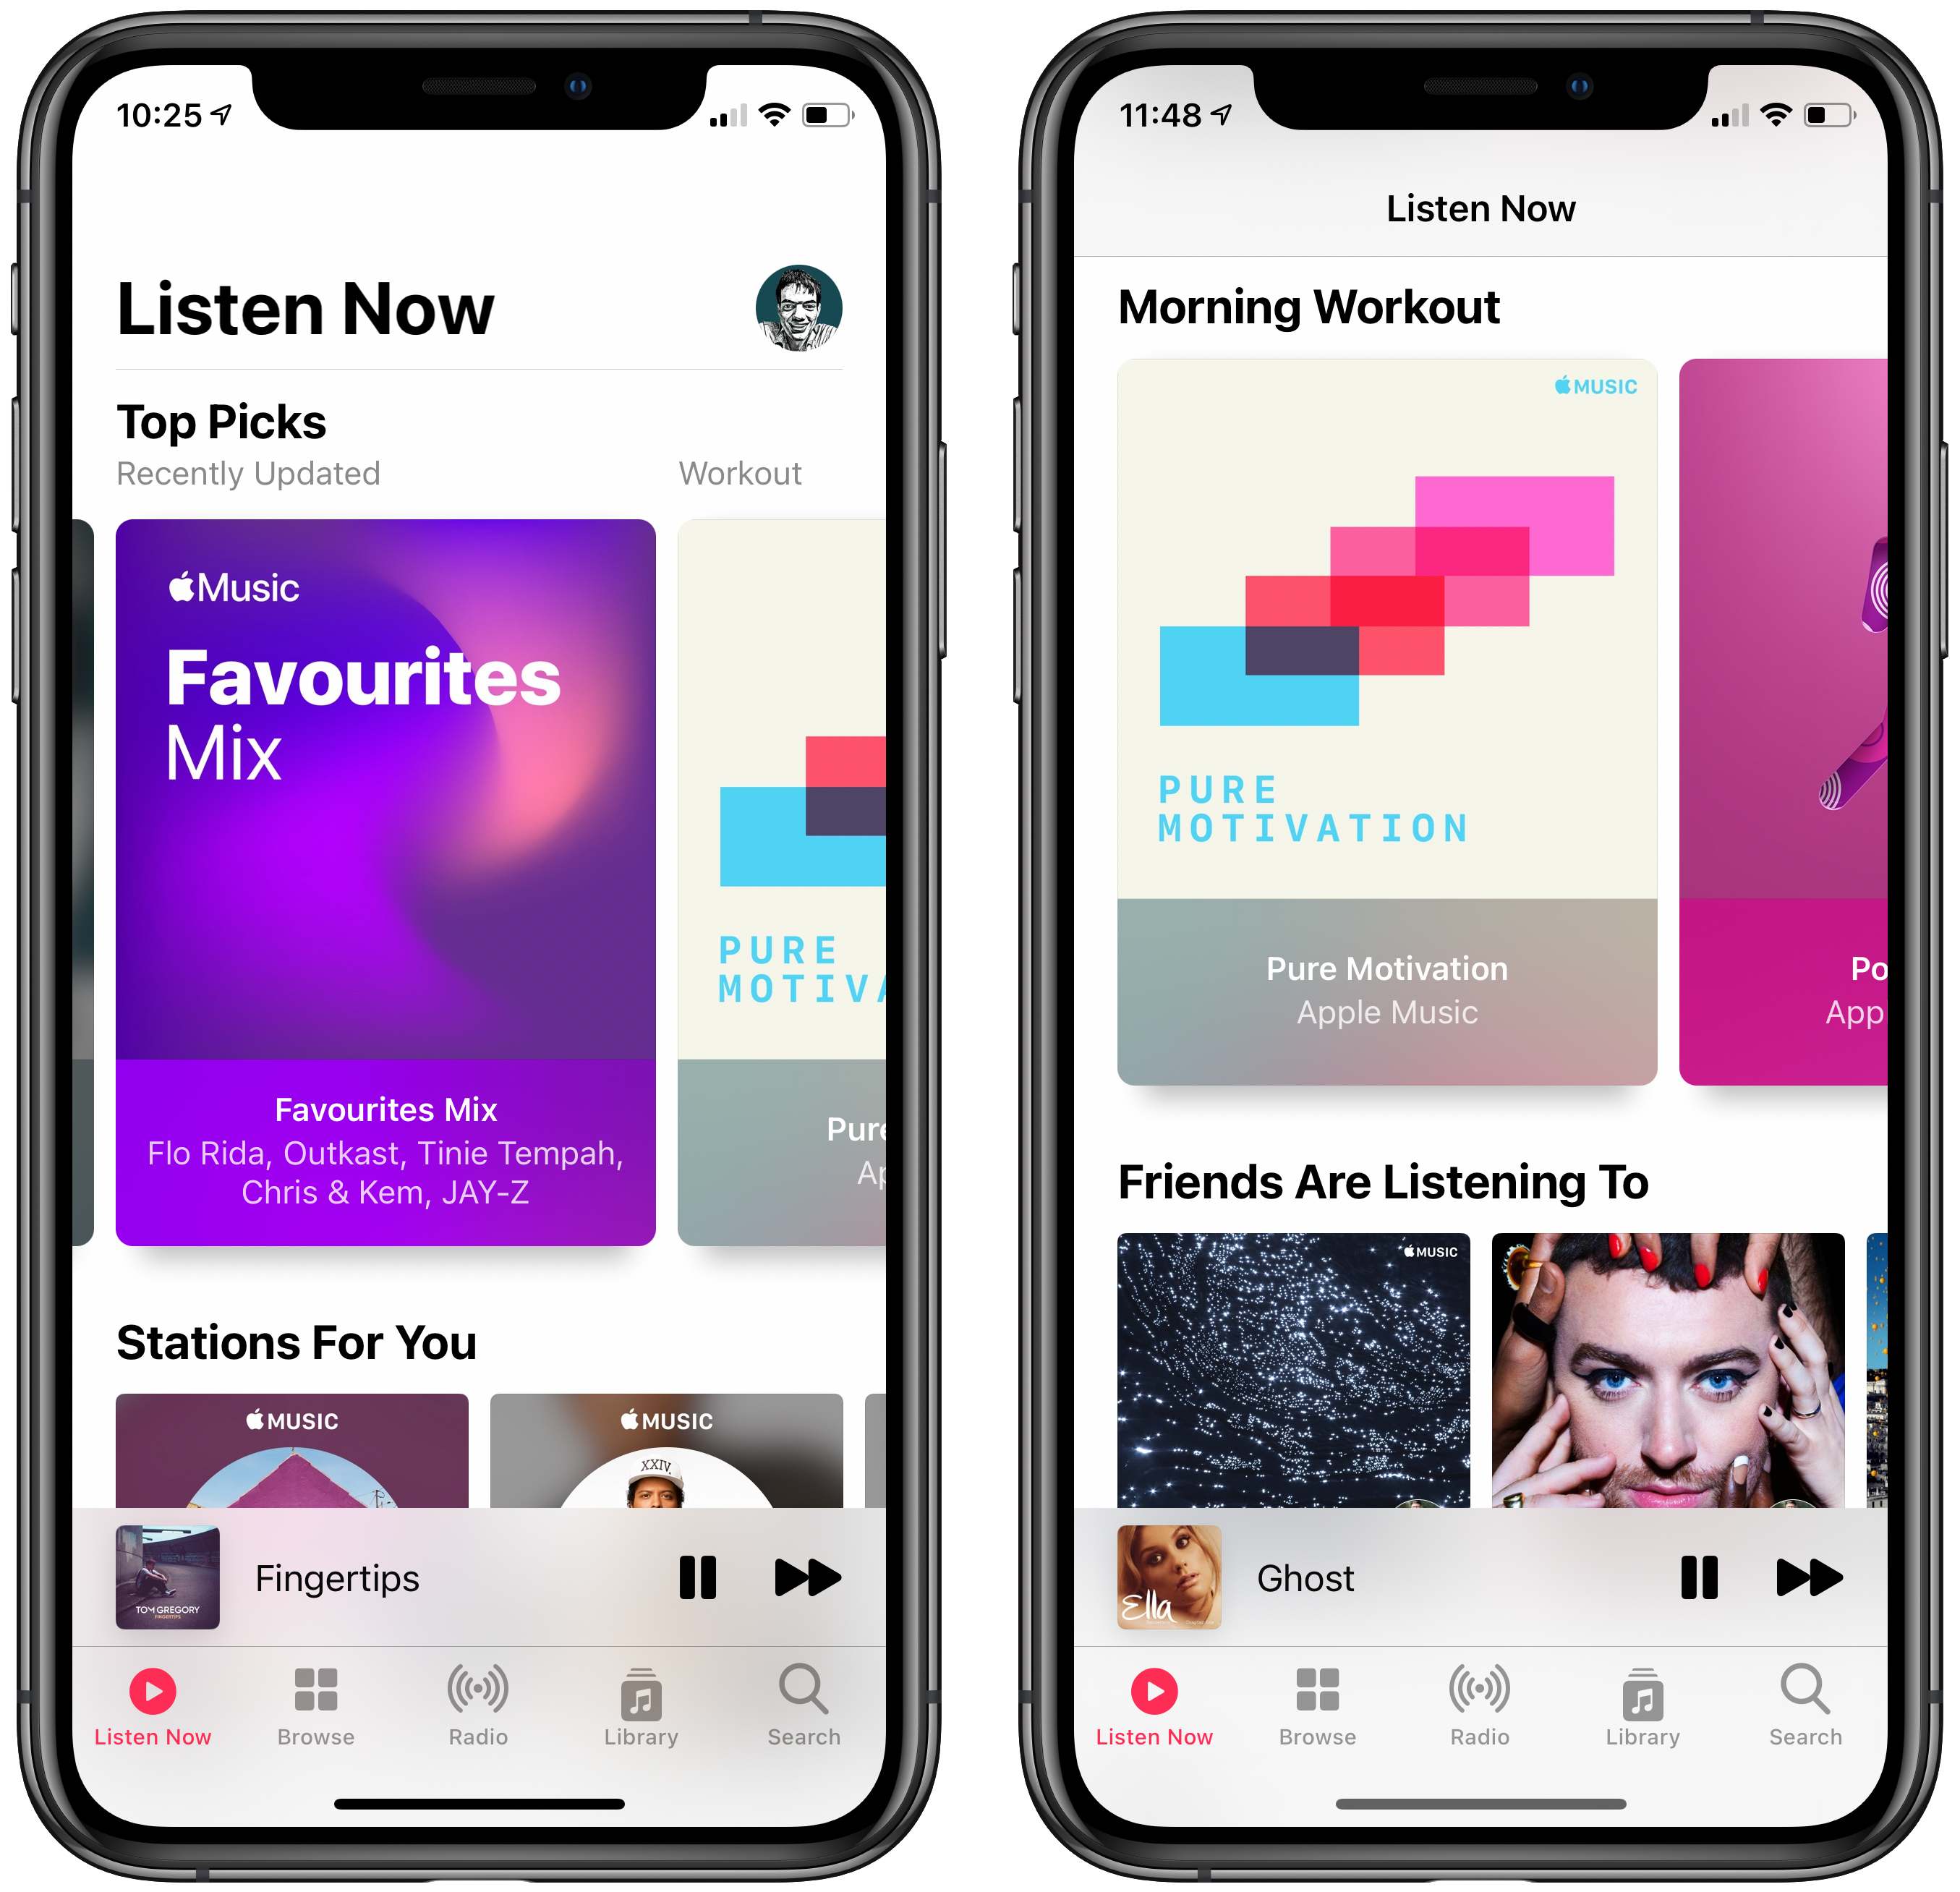 What S New In The Apple Music App For Ios 14 Listen Now Tab